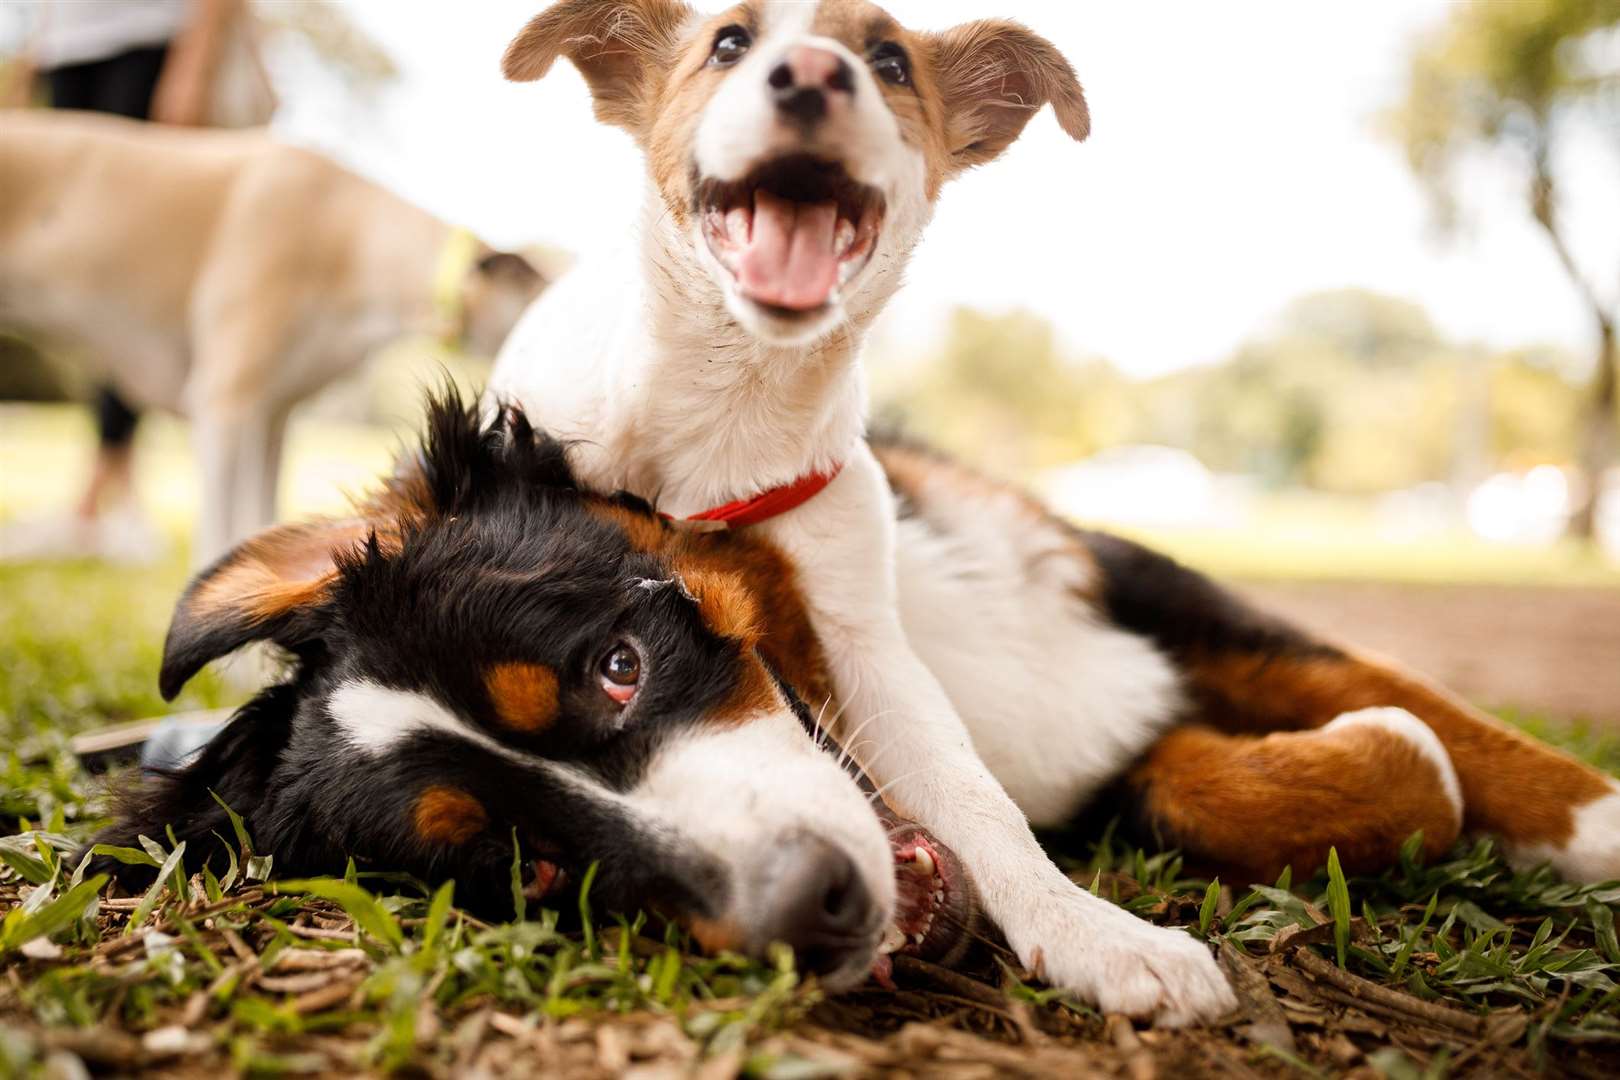 Reports of animal cruelty always rise in summer, says the RSPCA. Photo: iStock.